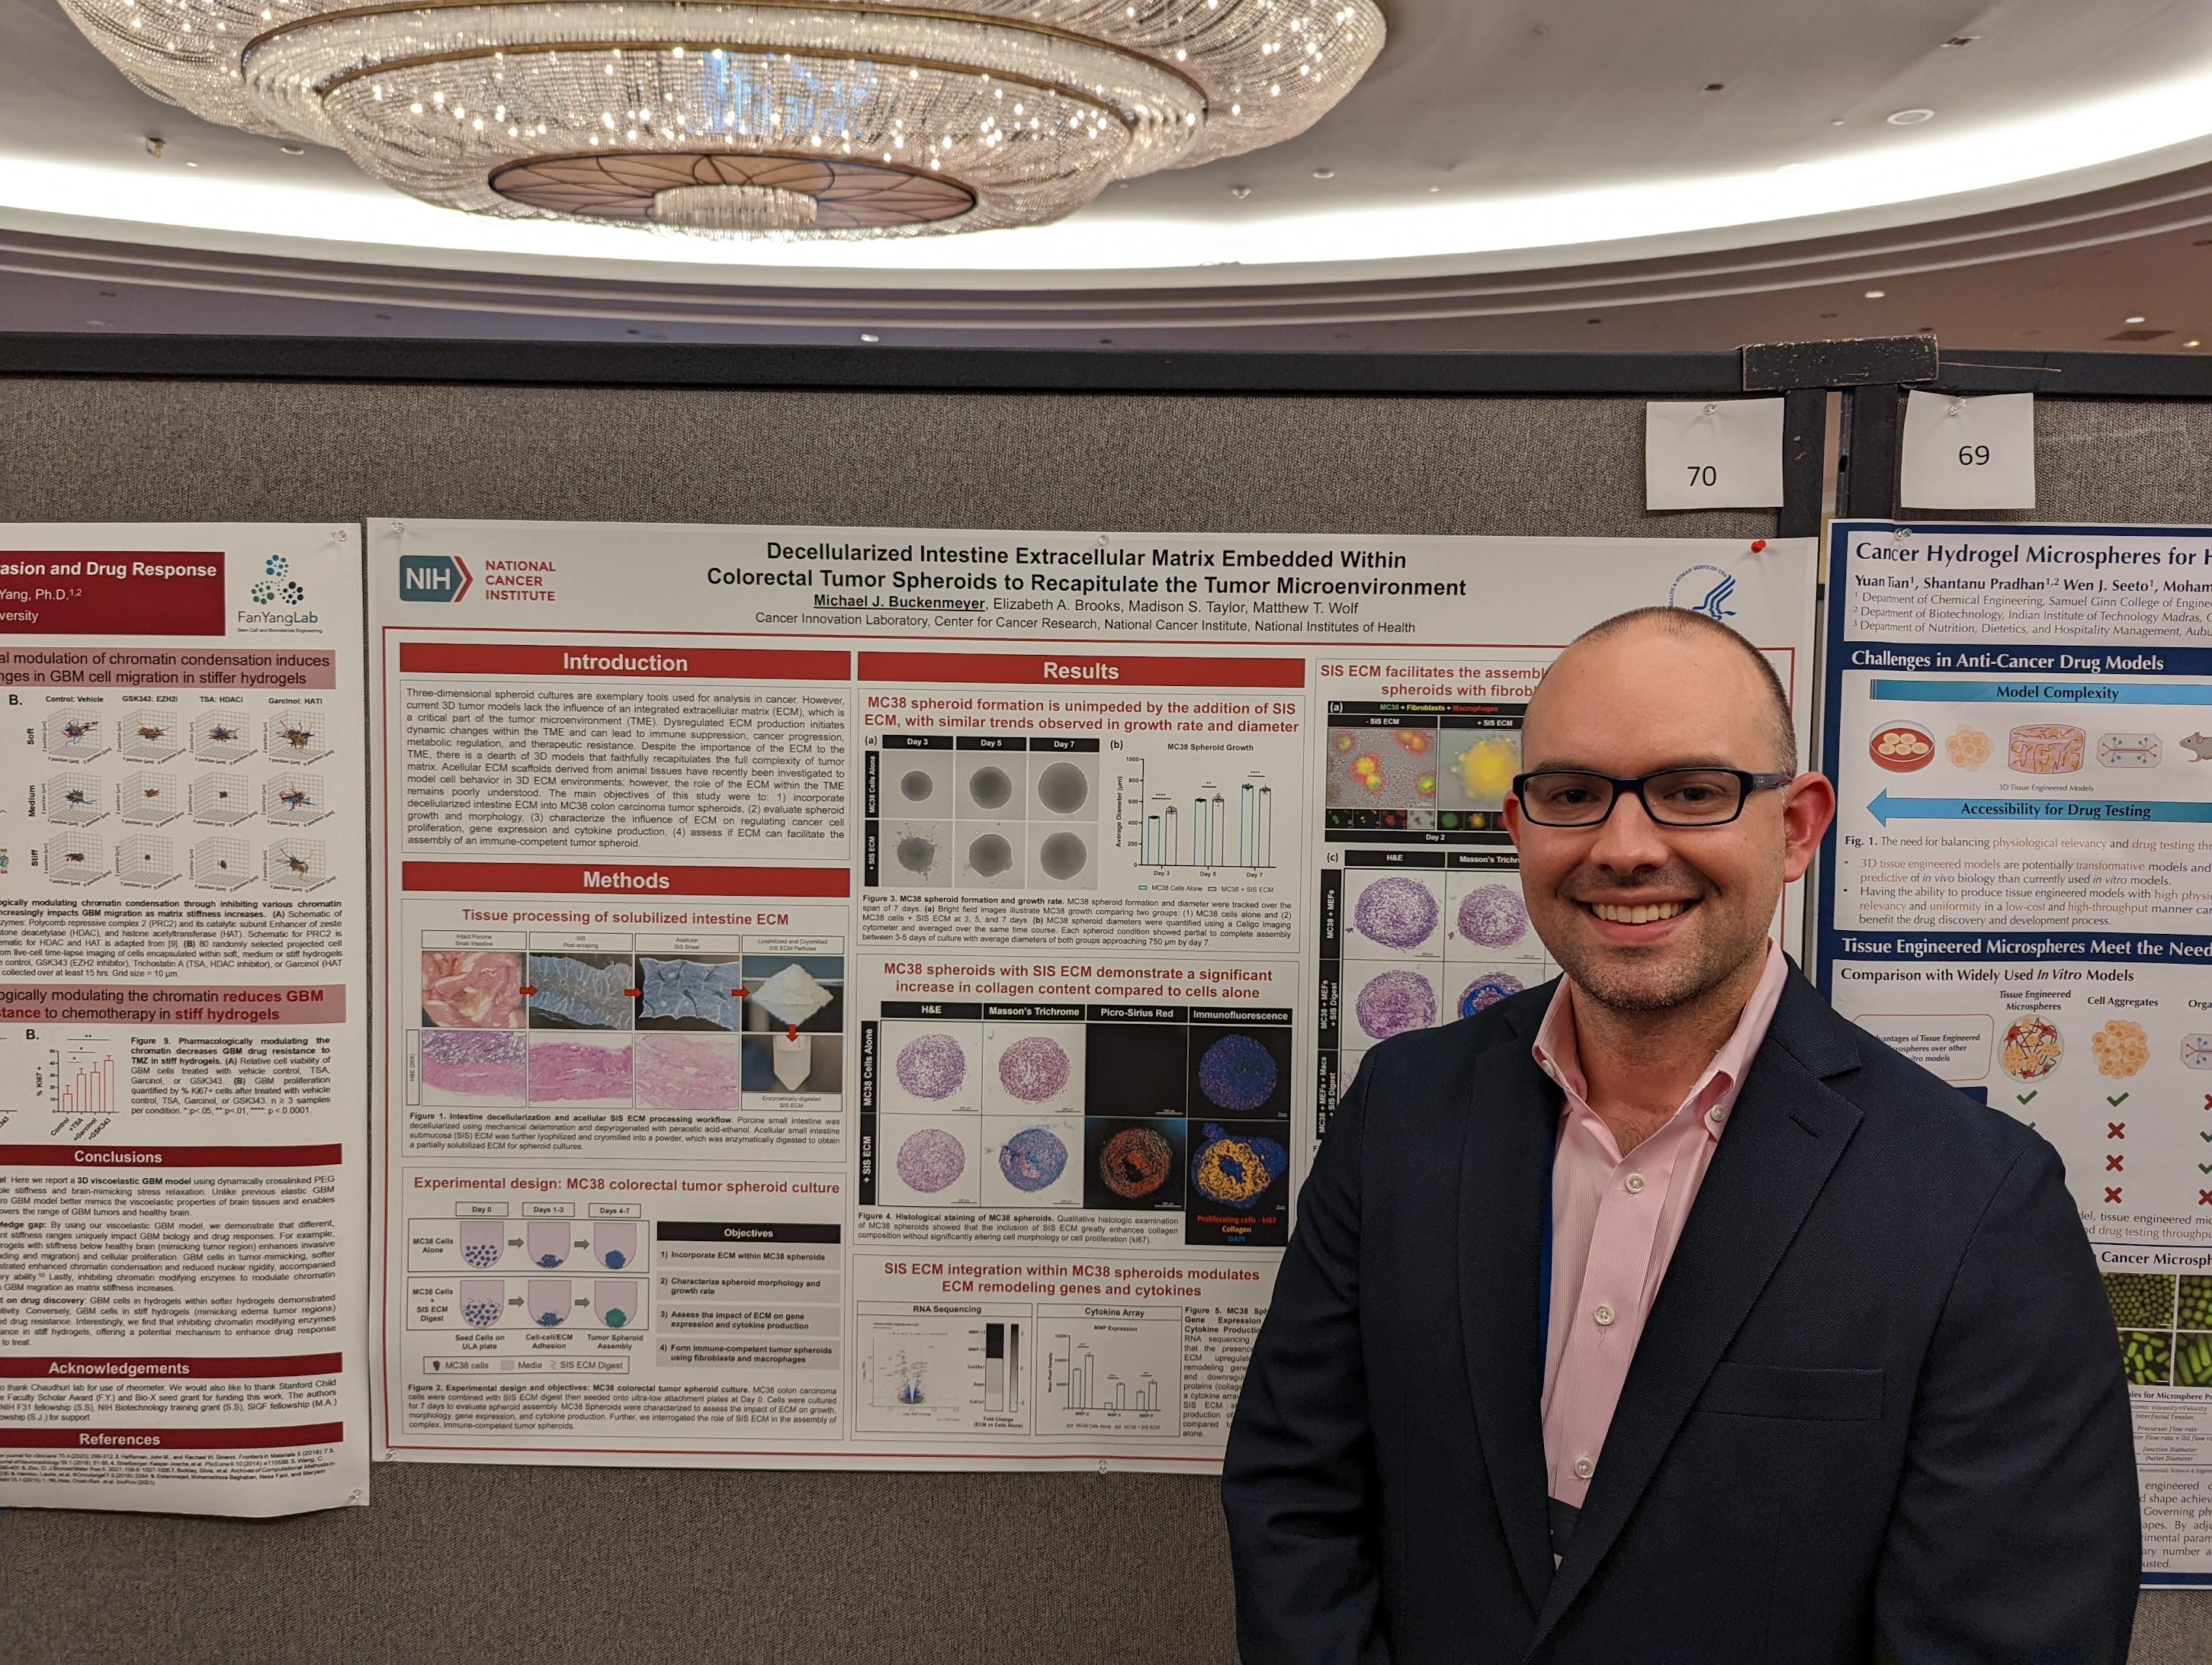 Mike Buckenmeyer presenting his work at the Society for Biomaterials Meeting.